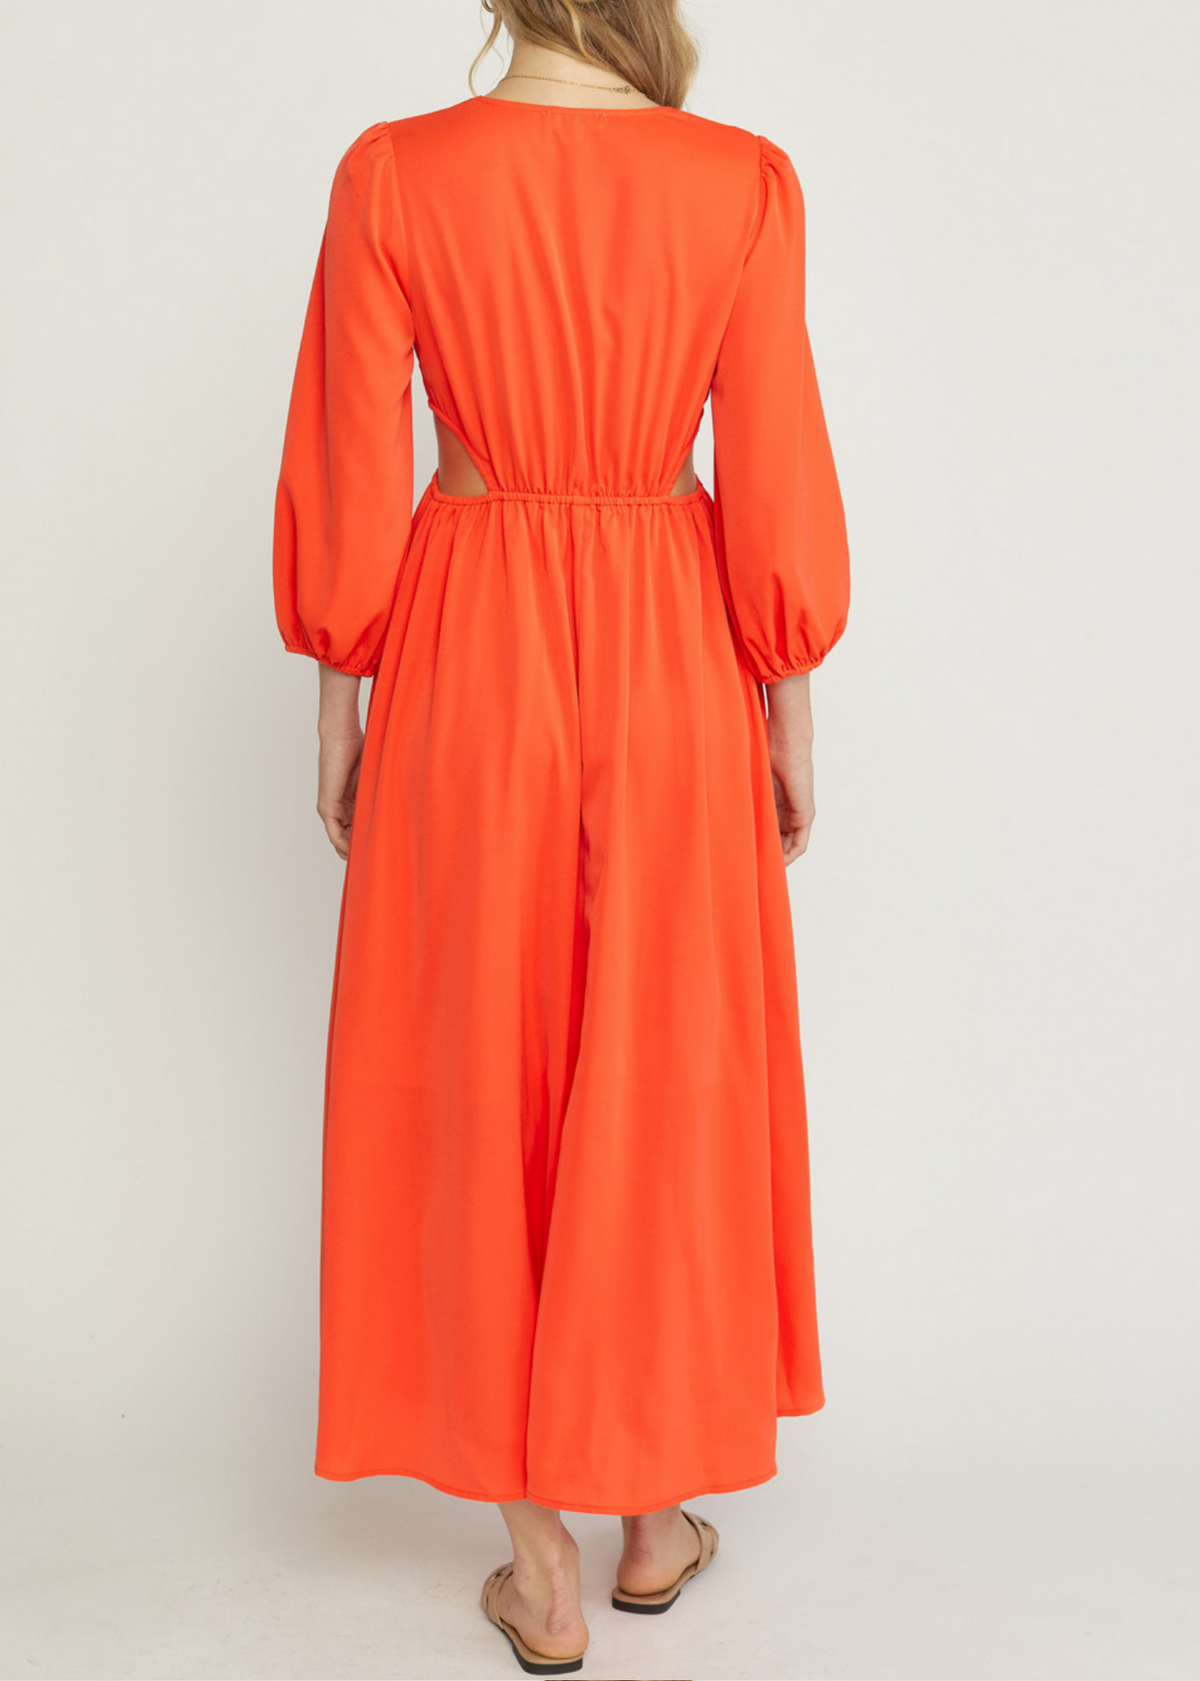 Bae-cation - Bodice Cutaway Maxi Dress with Sleeves